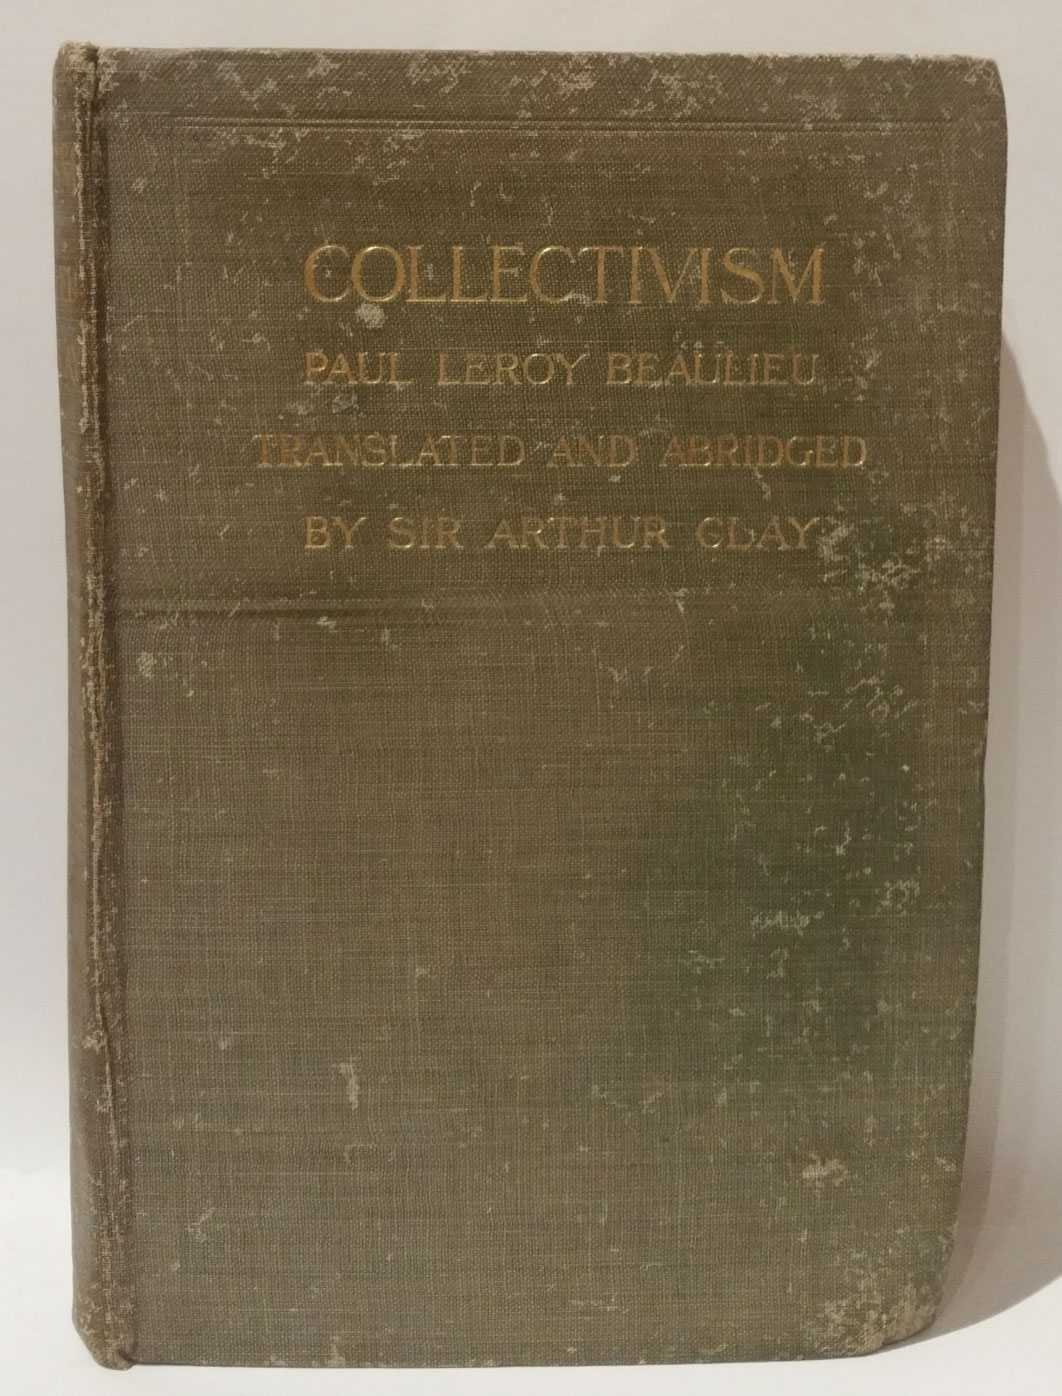 Paul Leroy Beaulieu - Collectivism: A Study of Some of the Leading Social Questions of the Day